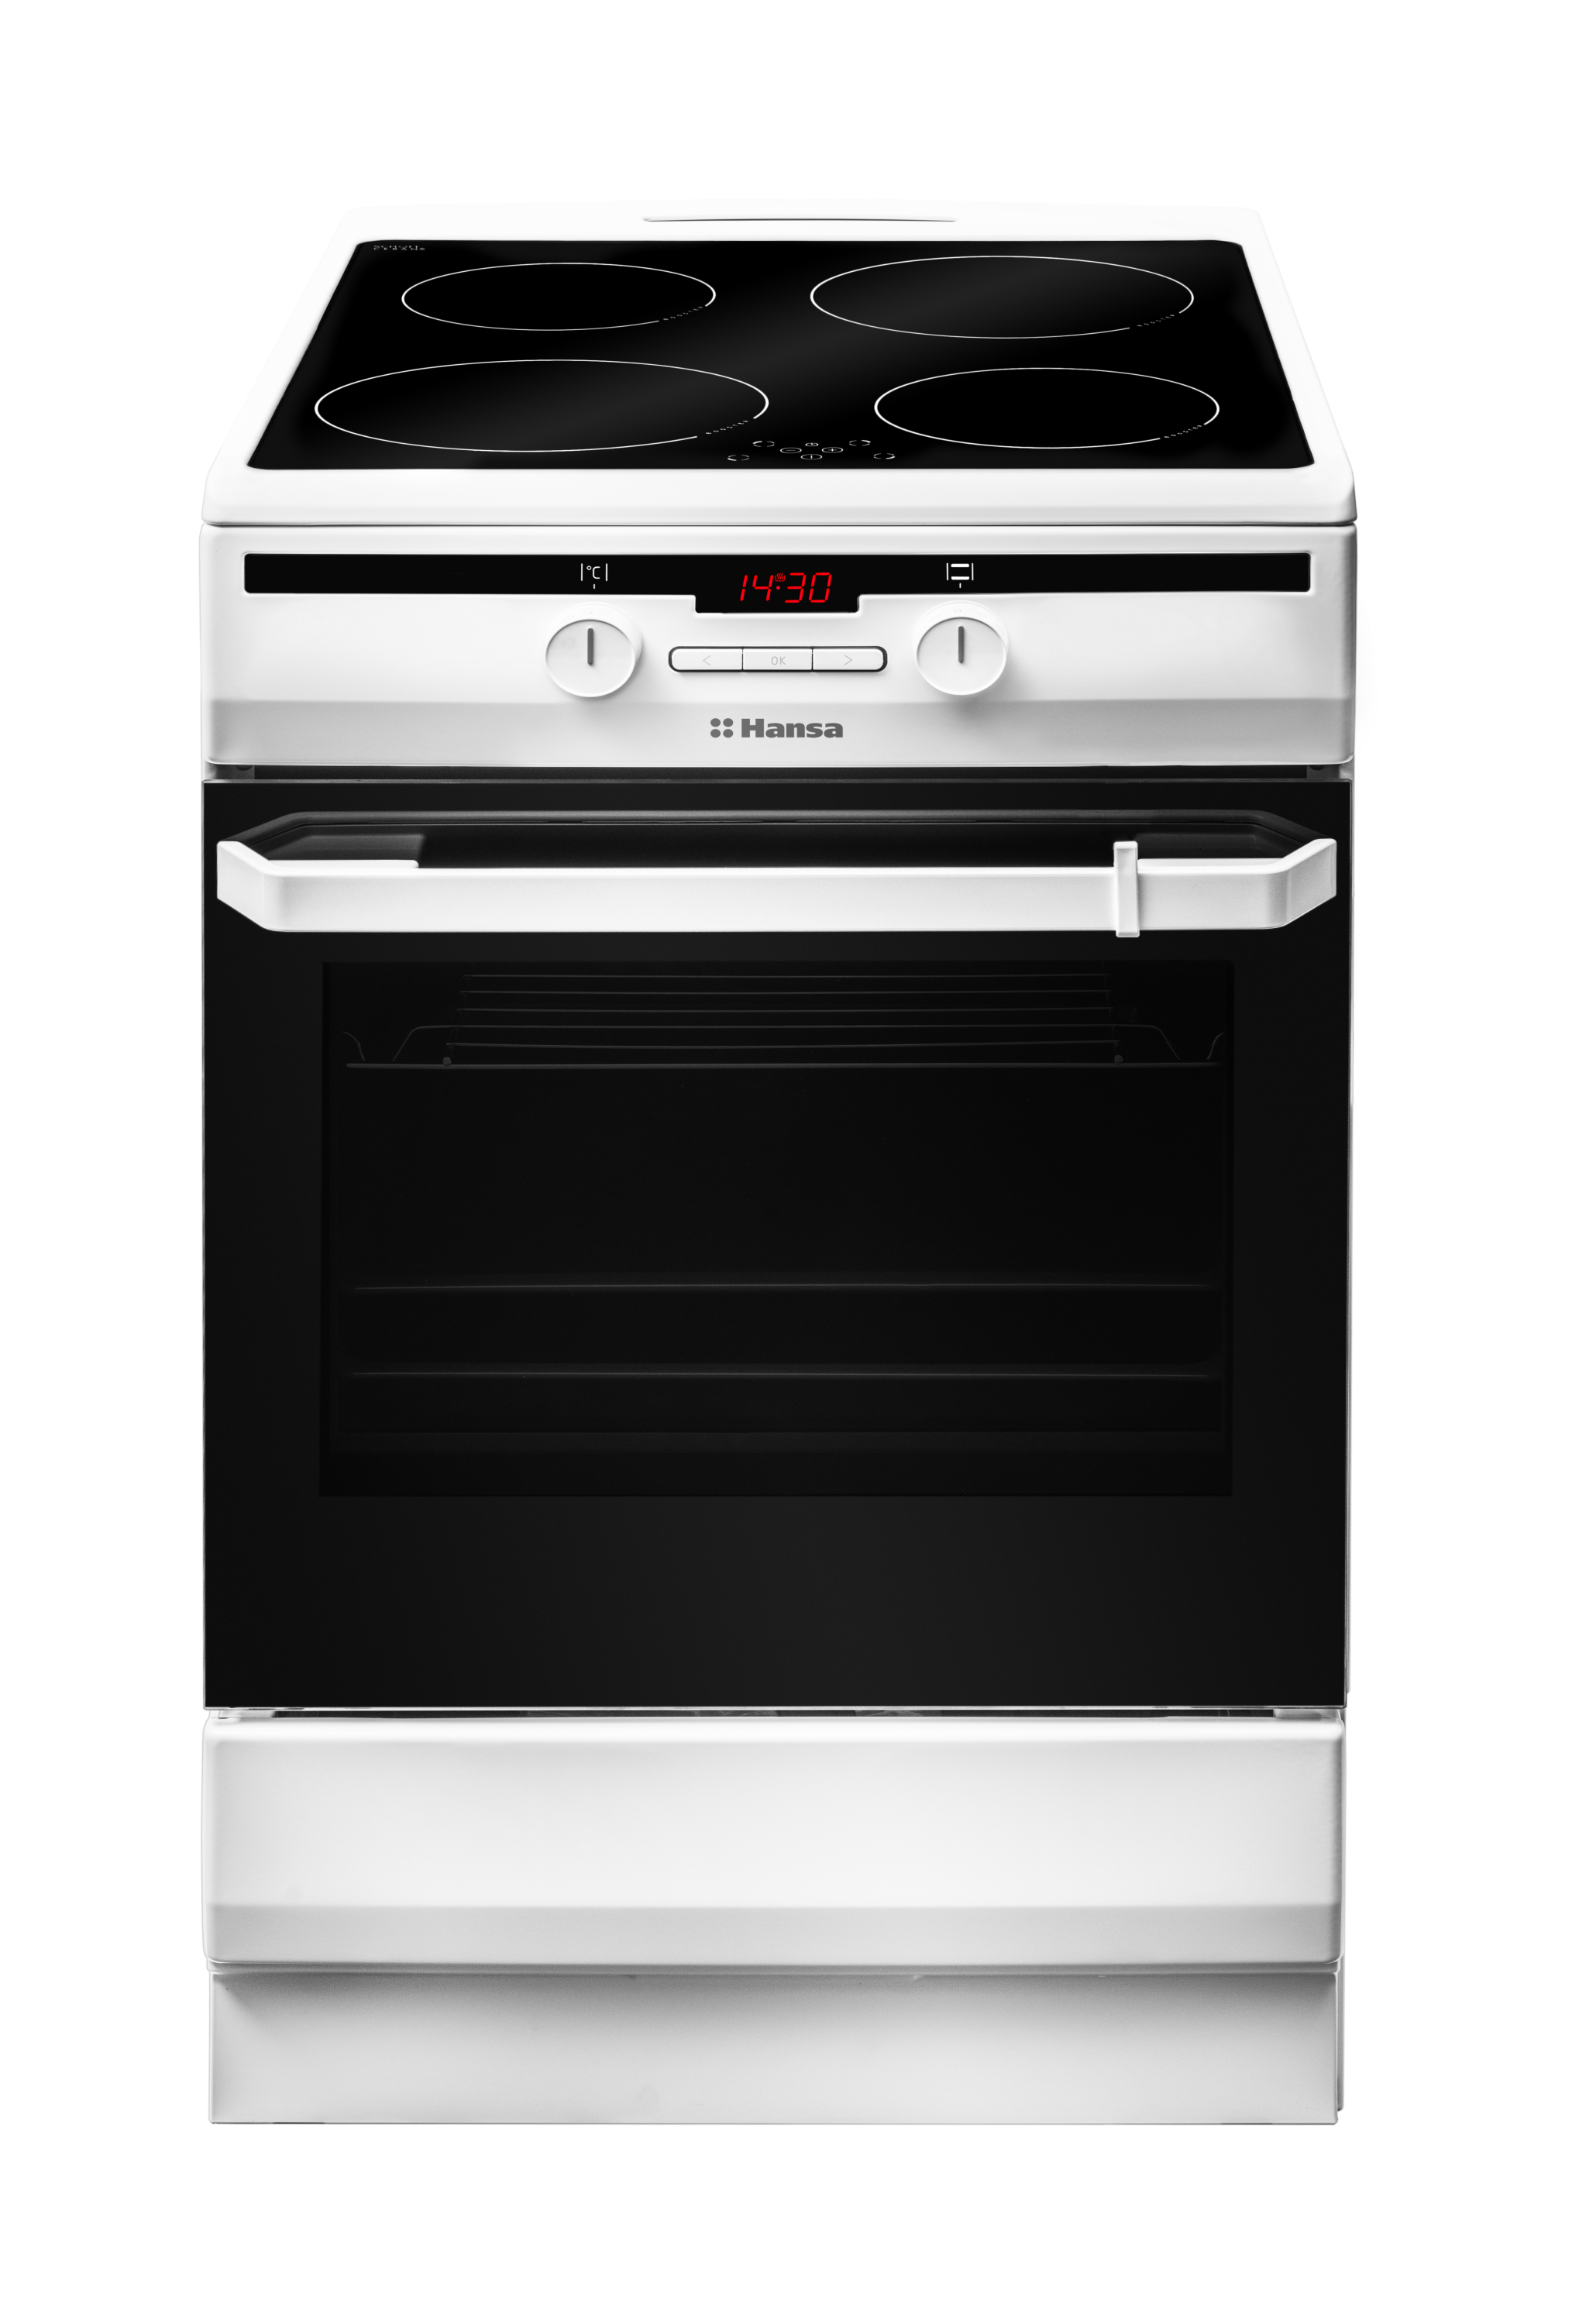 Freestanding cooker with induction hob